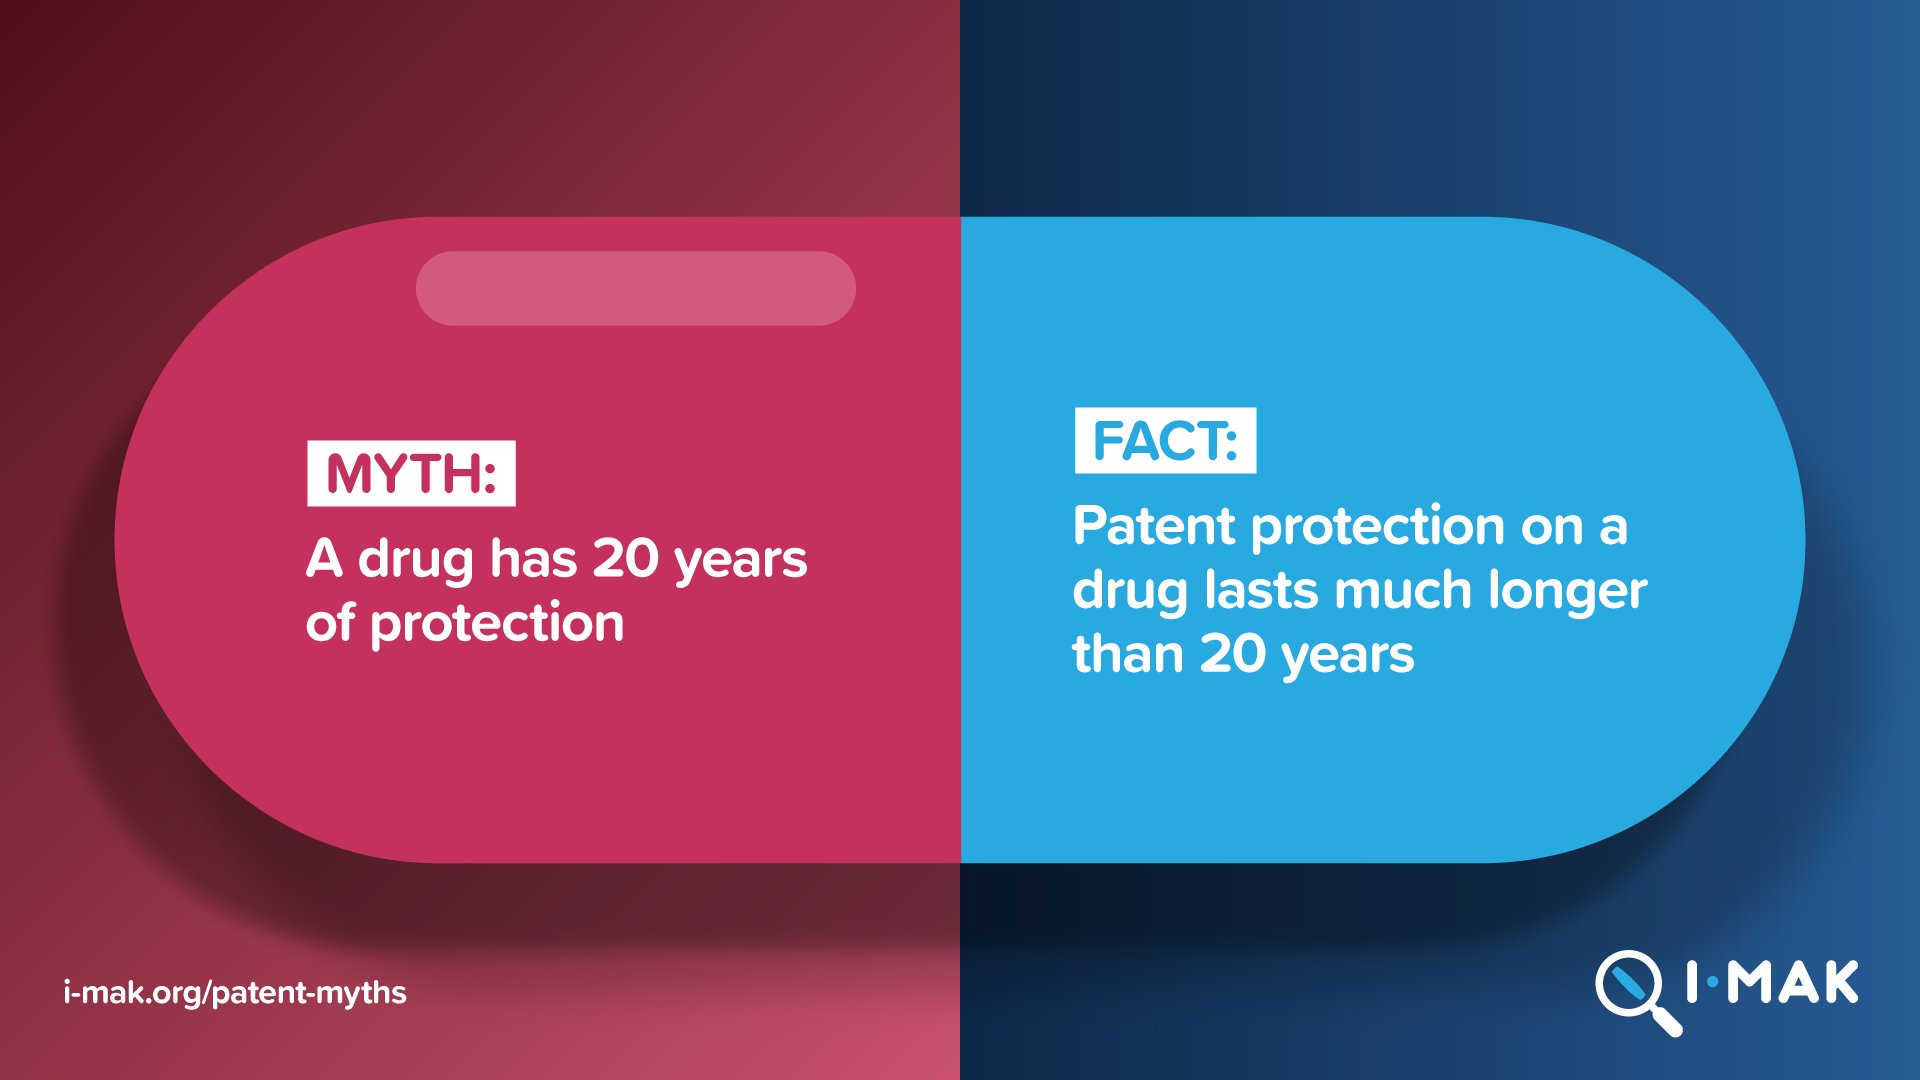 Can a patent last longer than 20 years?